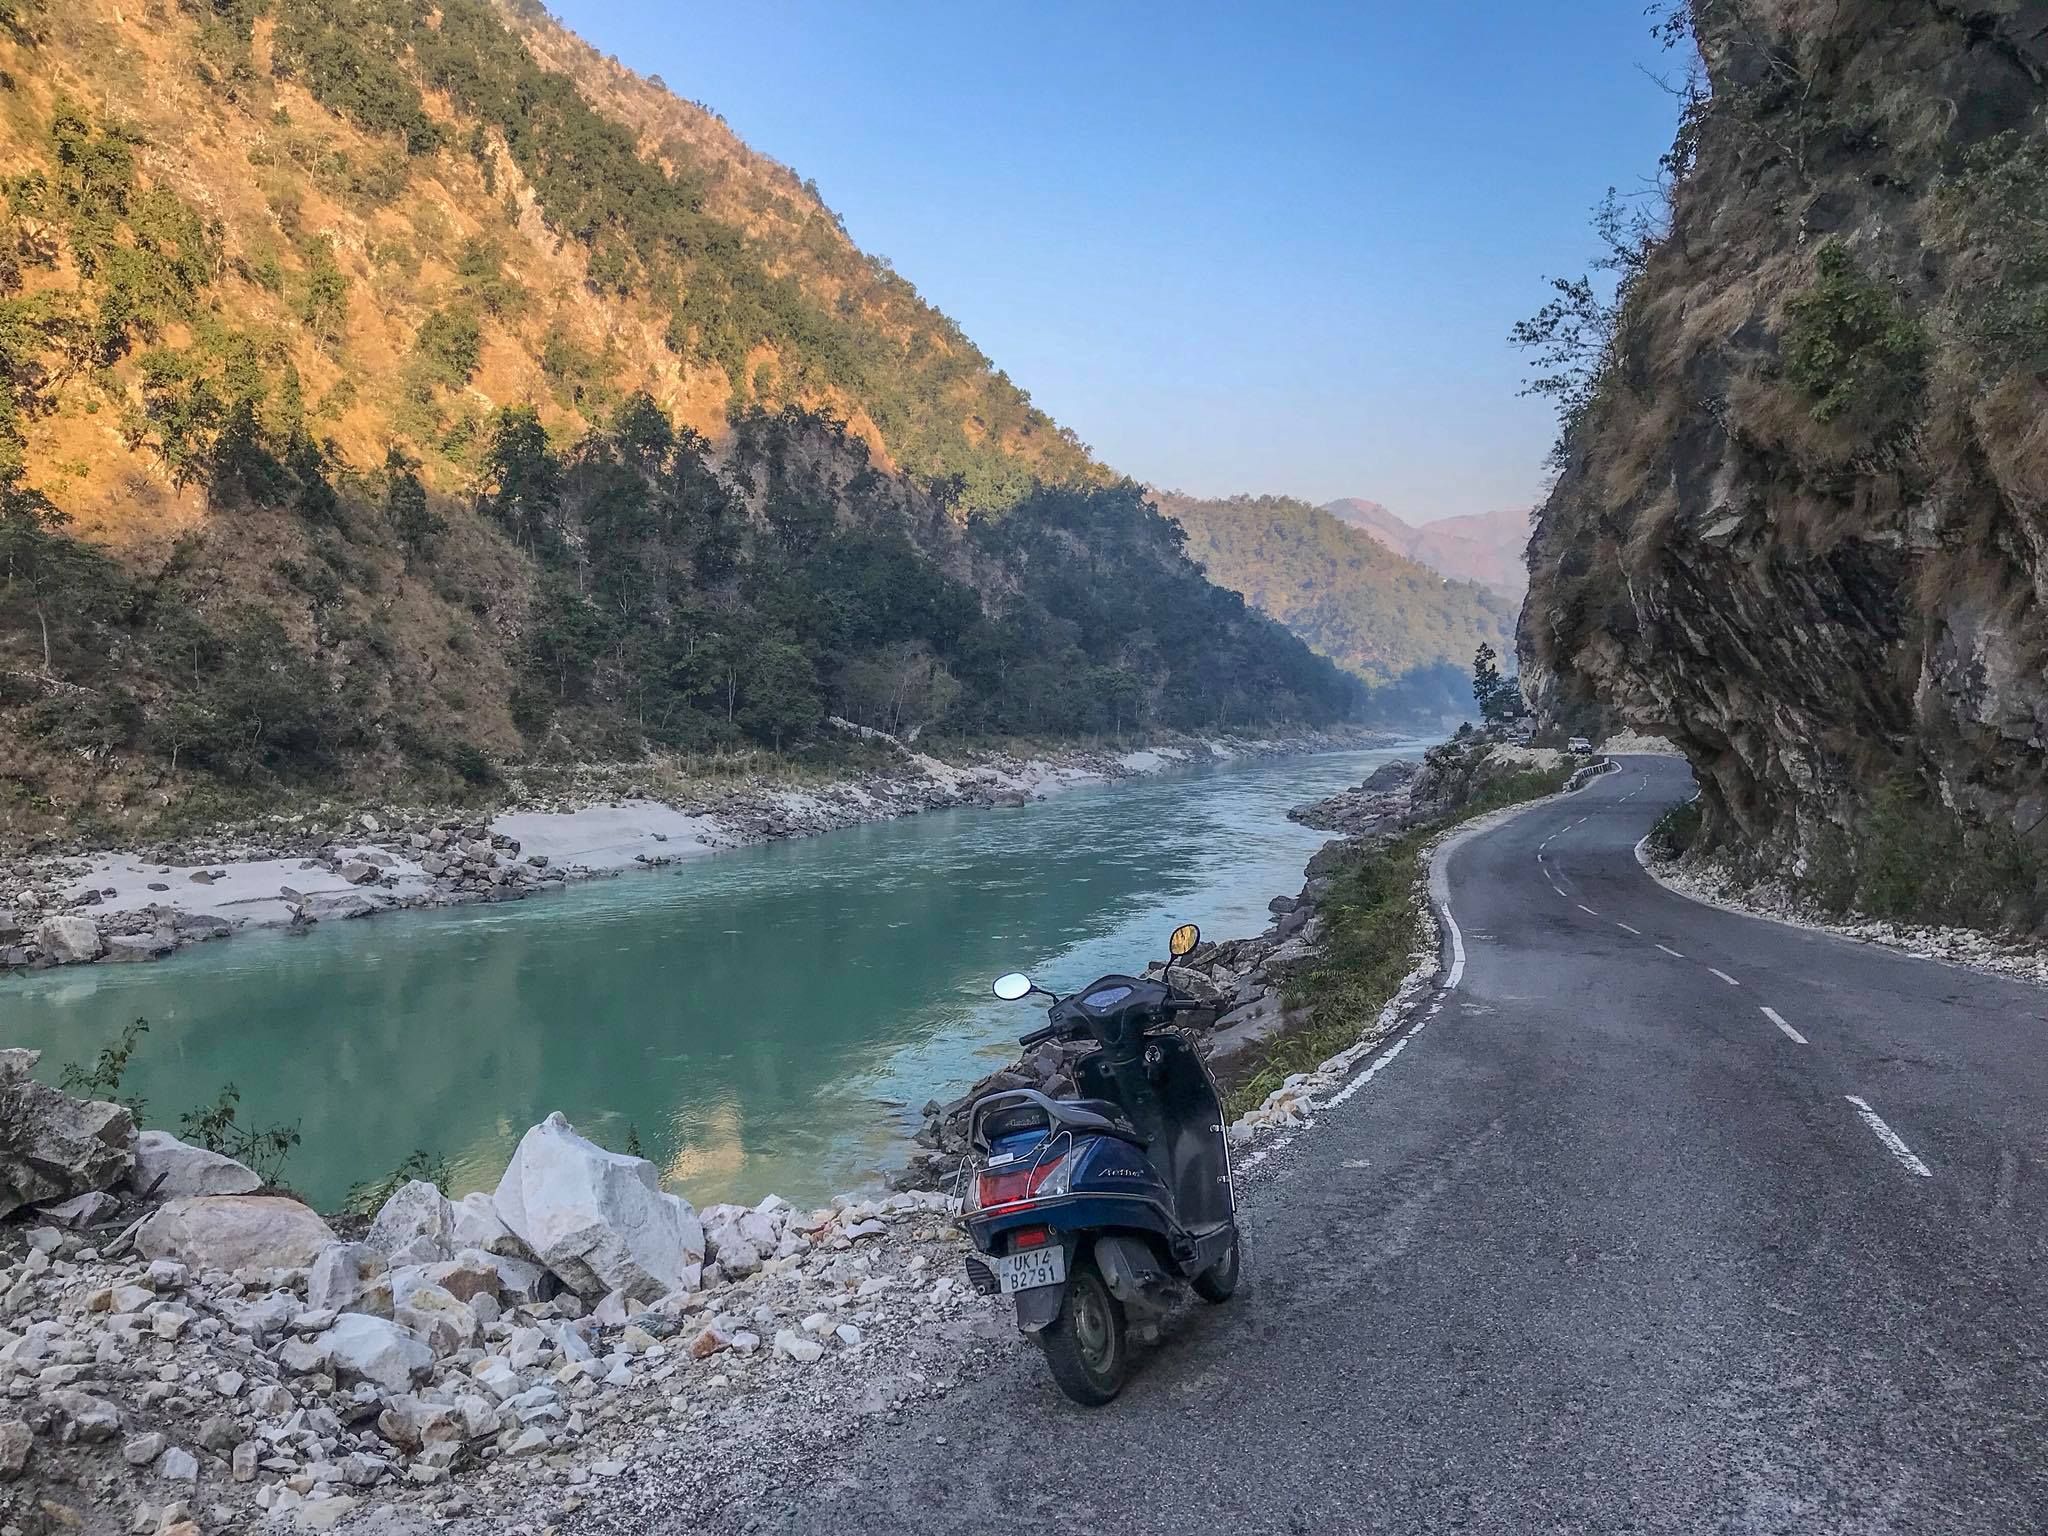 Rent A Scooter In Rishikesh – Top 5 Places You Should Visit